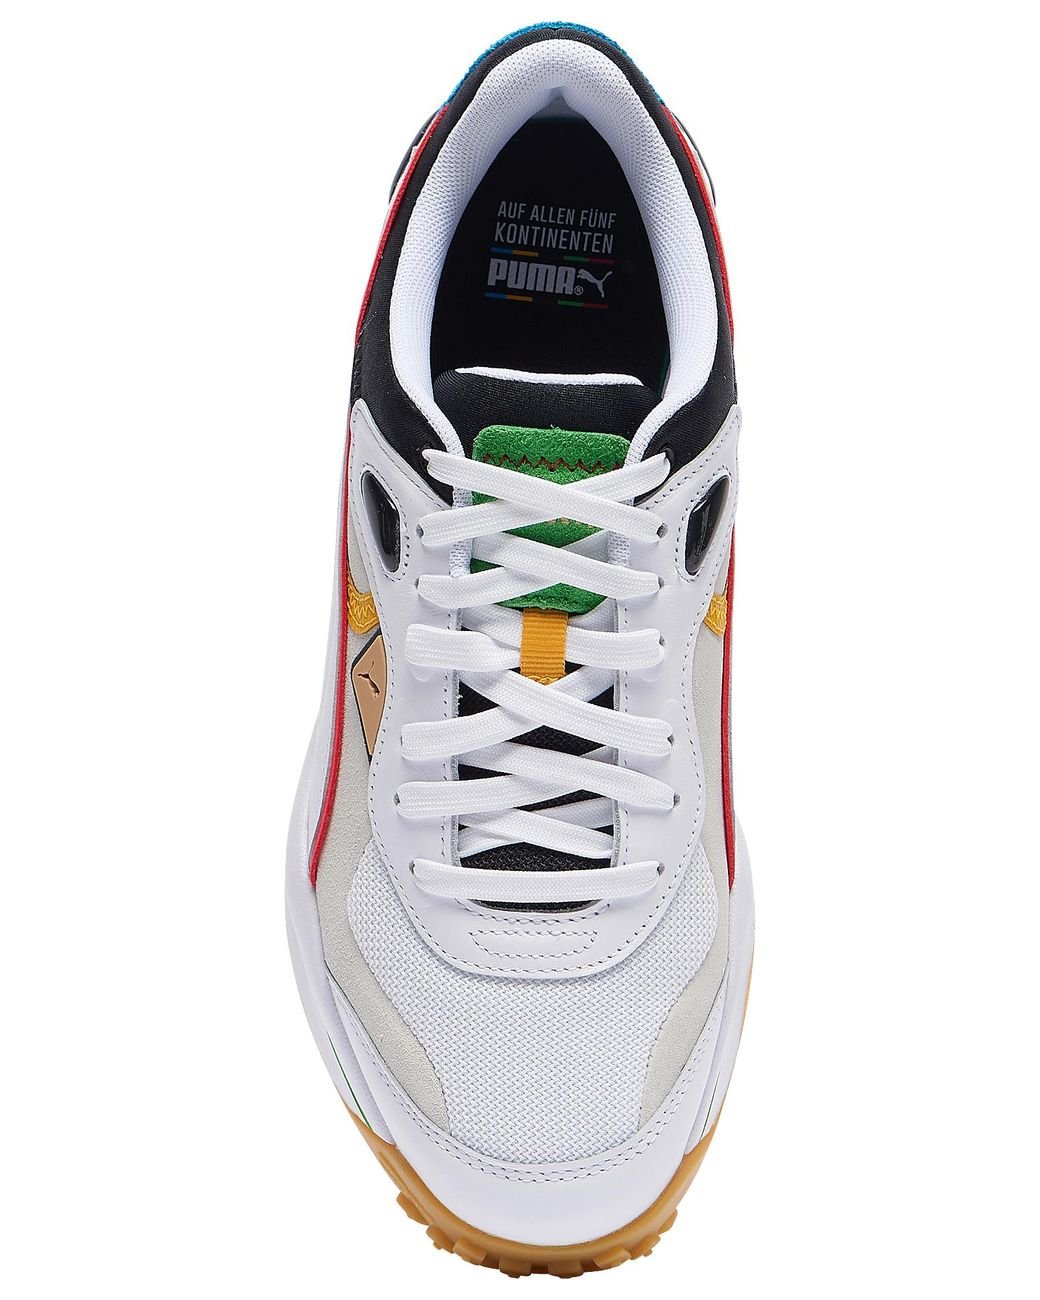 PUMA Synthetic Street Rider - Shoes in White for Men - Save 16% - Lyst